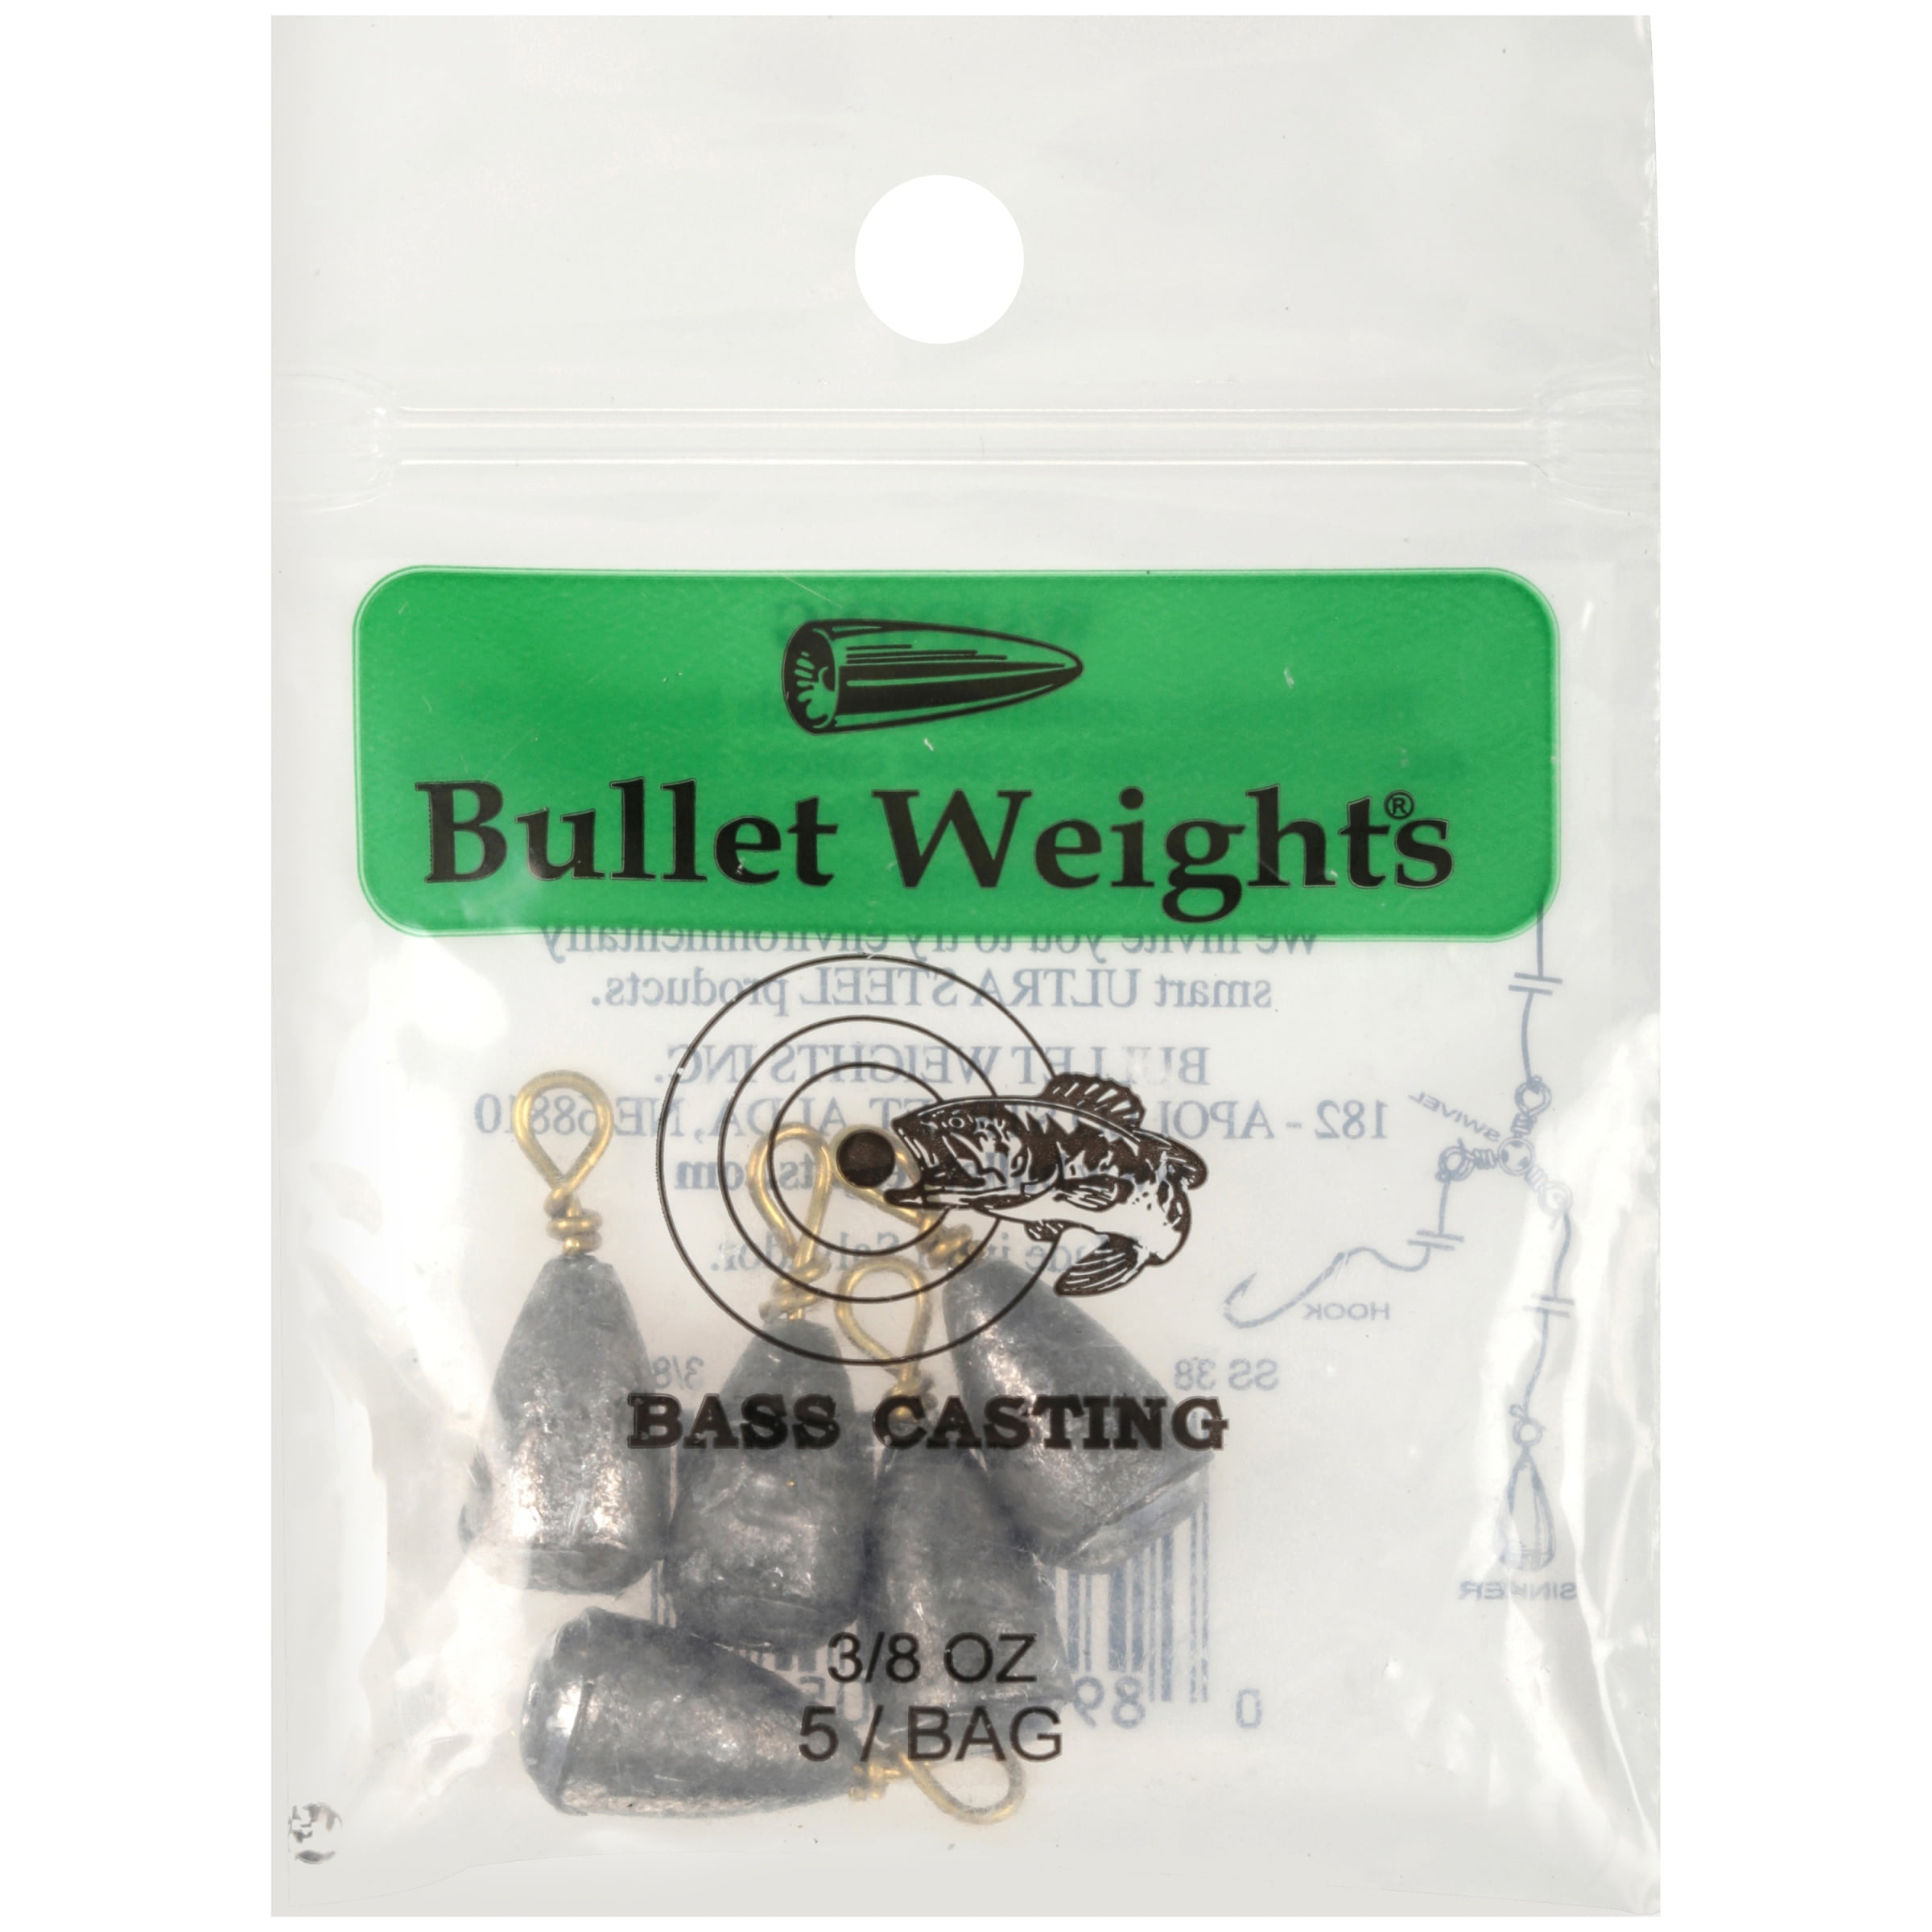 2 Packs Bullet Weights Bass Casting Sinkers - 1/4 Oz Lead Weights (5 Per  Pack) - NK Industries LTD